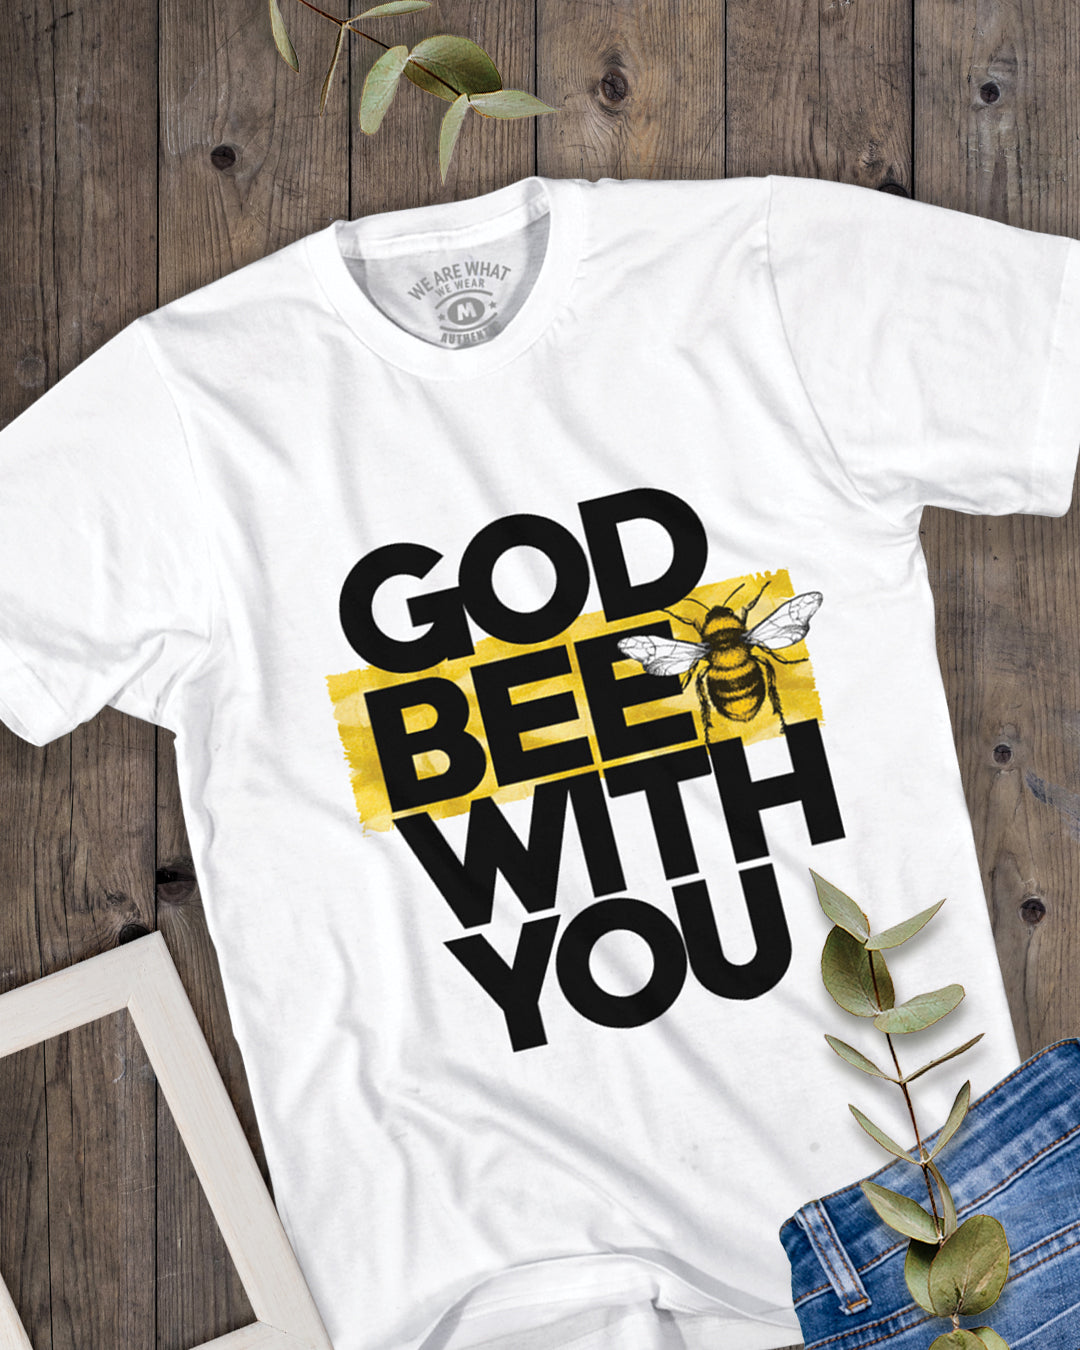 God bee with you